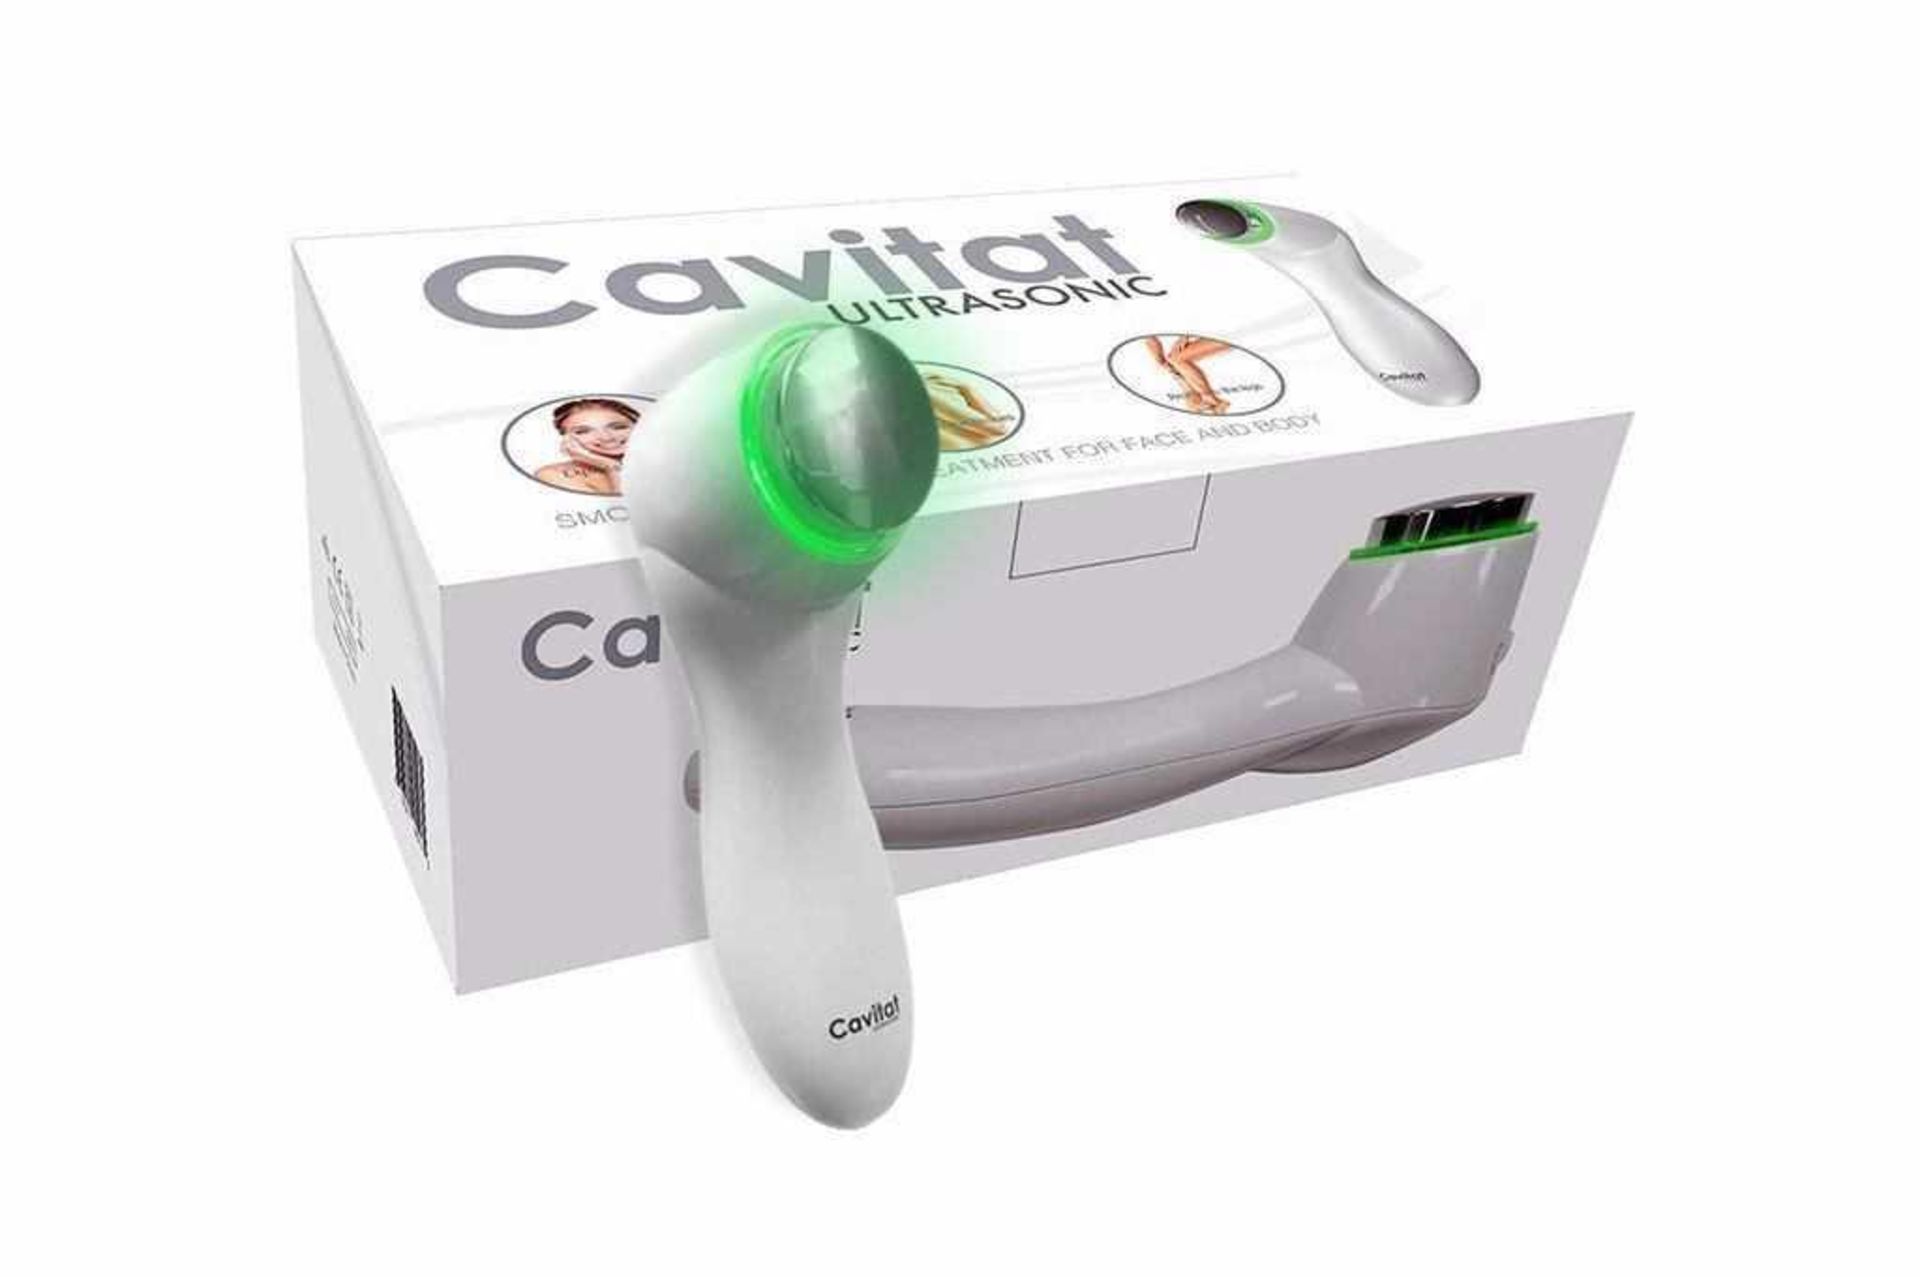 RRP £90 Boxed Cavitat Ultrasonic Smoothing Beauty Treatment For Face And Body